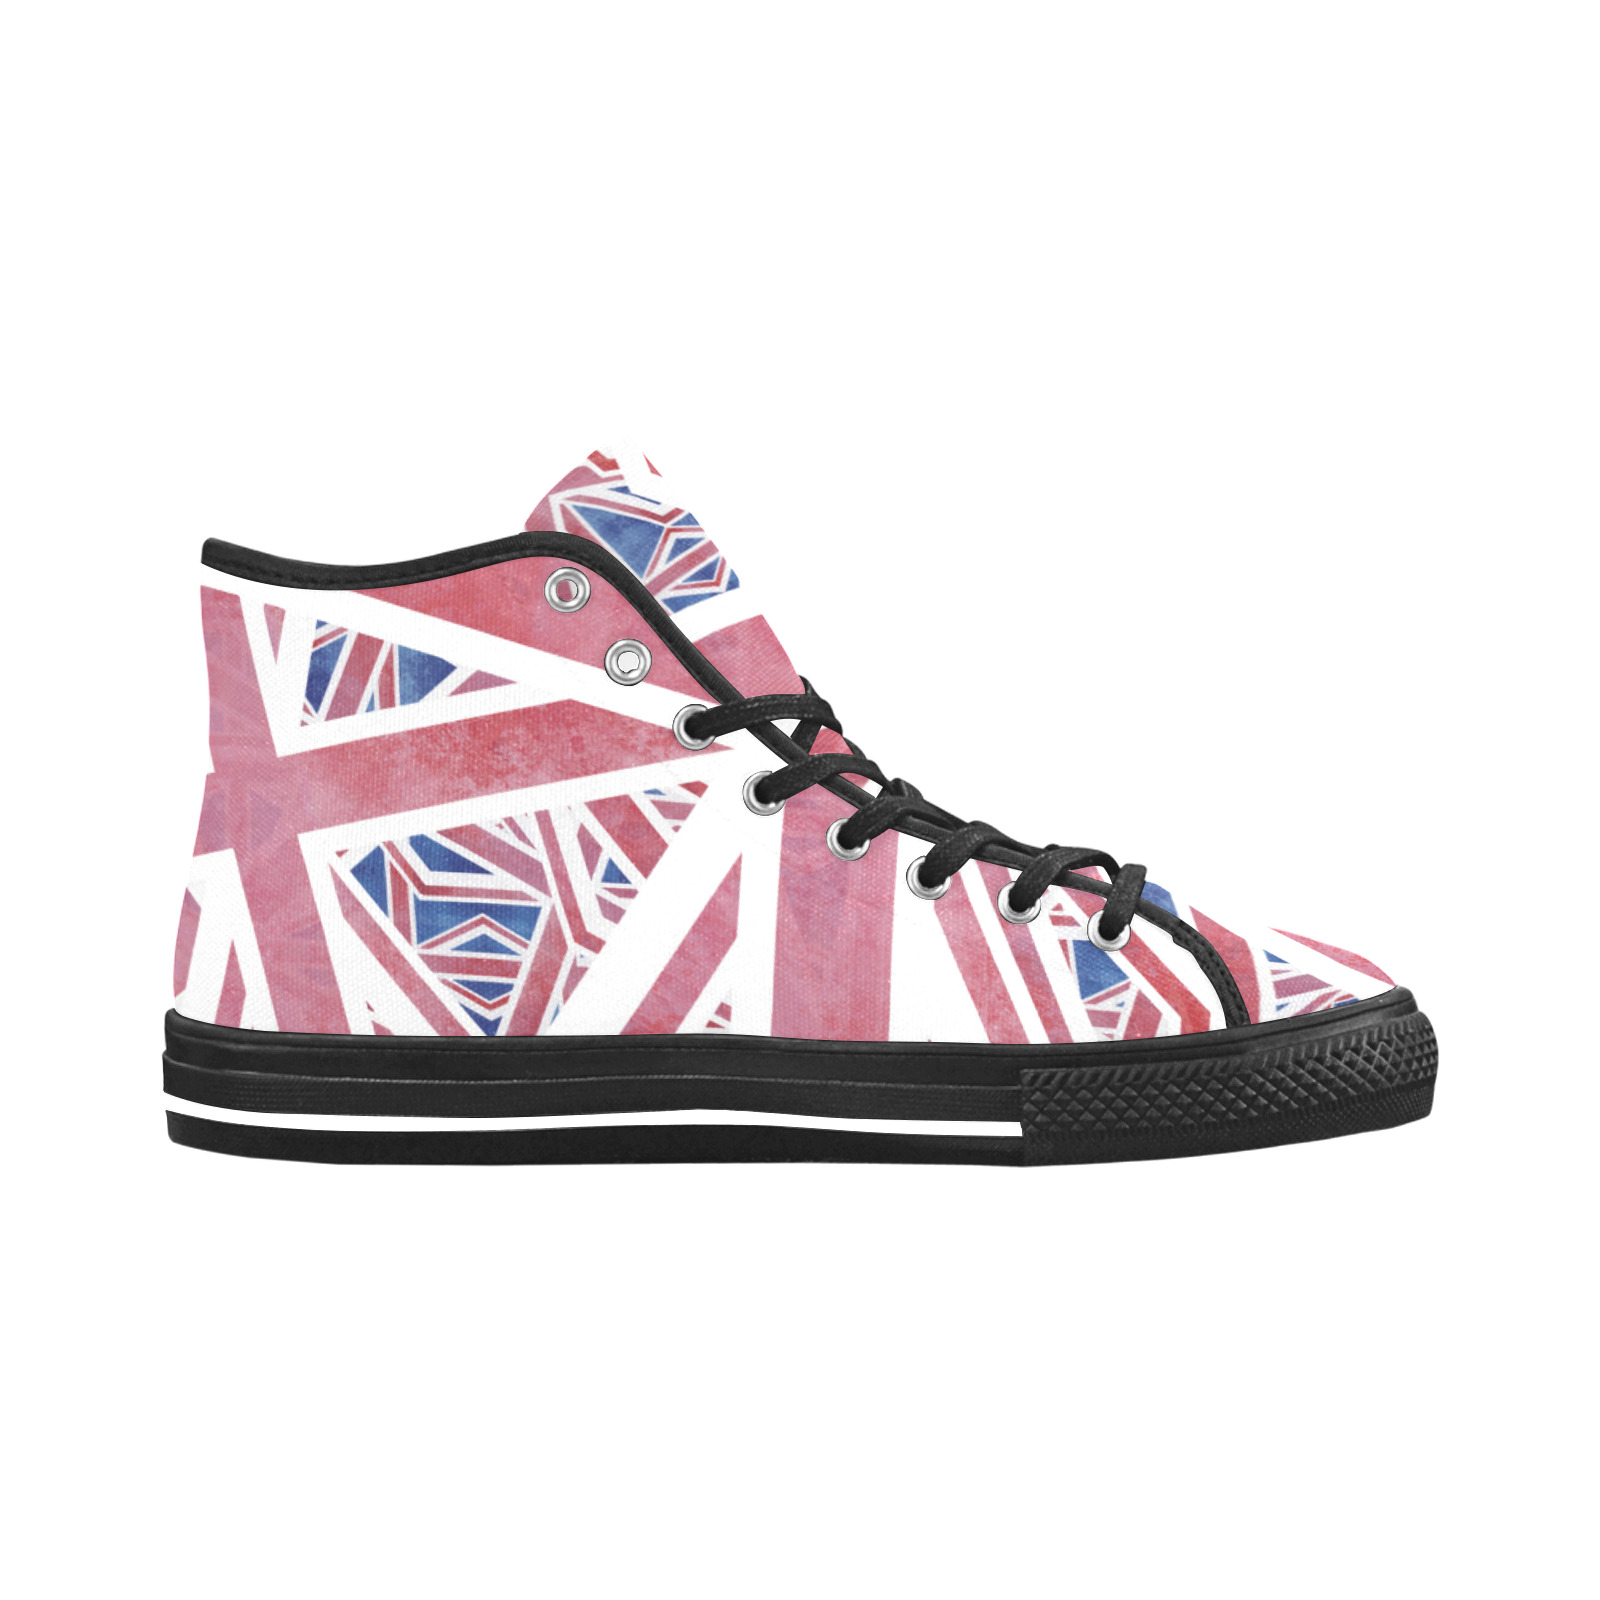 Abstract Union Jack British Flag Collage Vancouver H Women's Canvas Shoes (1013-1)